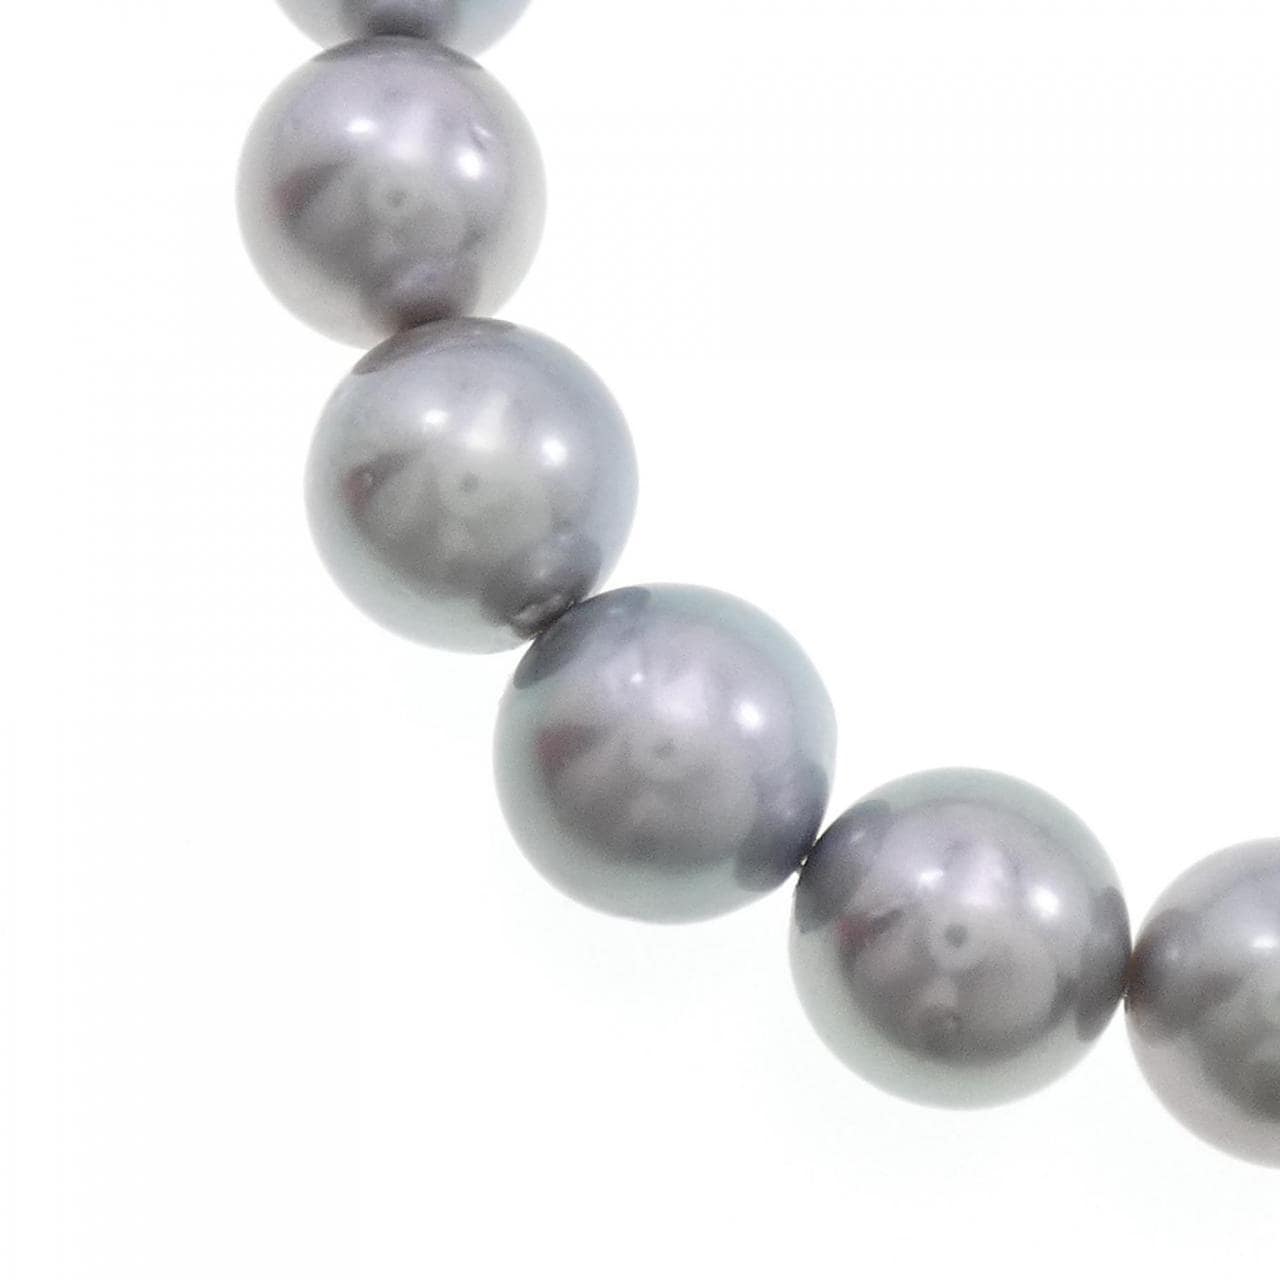 Silver clasp black pearl necklace 8-11.5mm